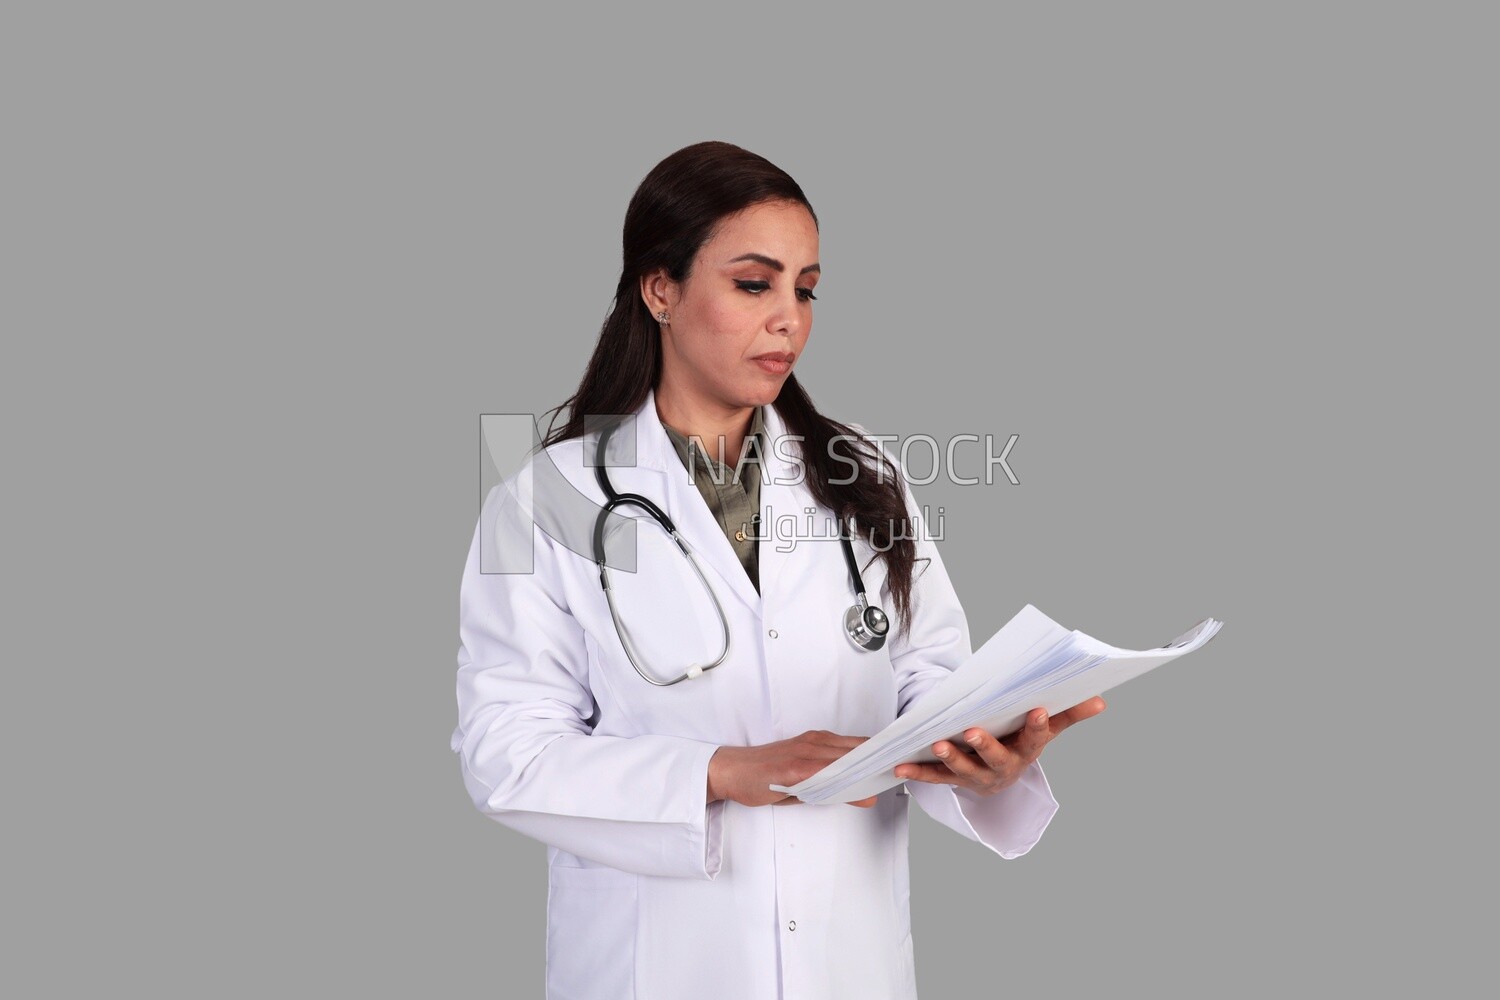 female doctor holding a patient's file